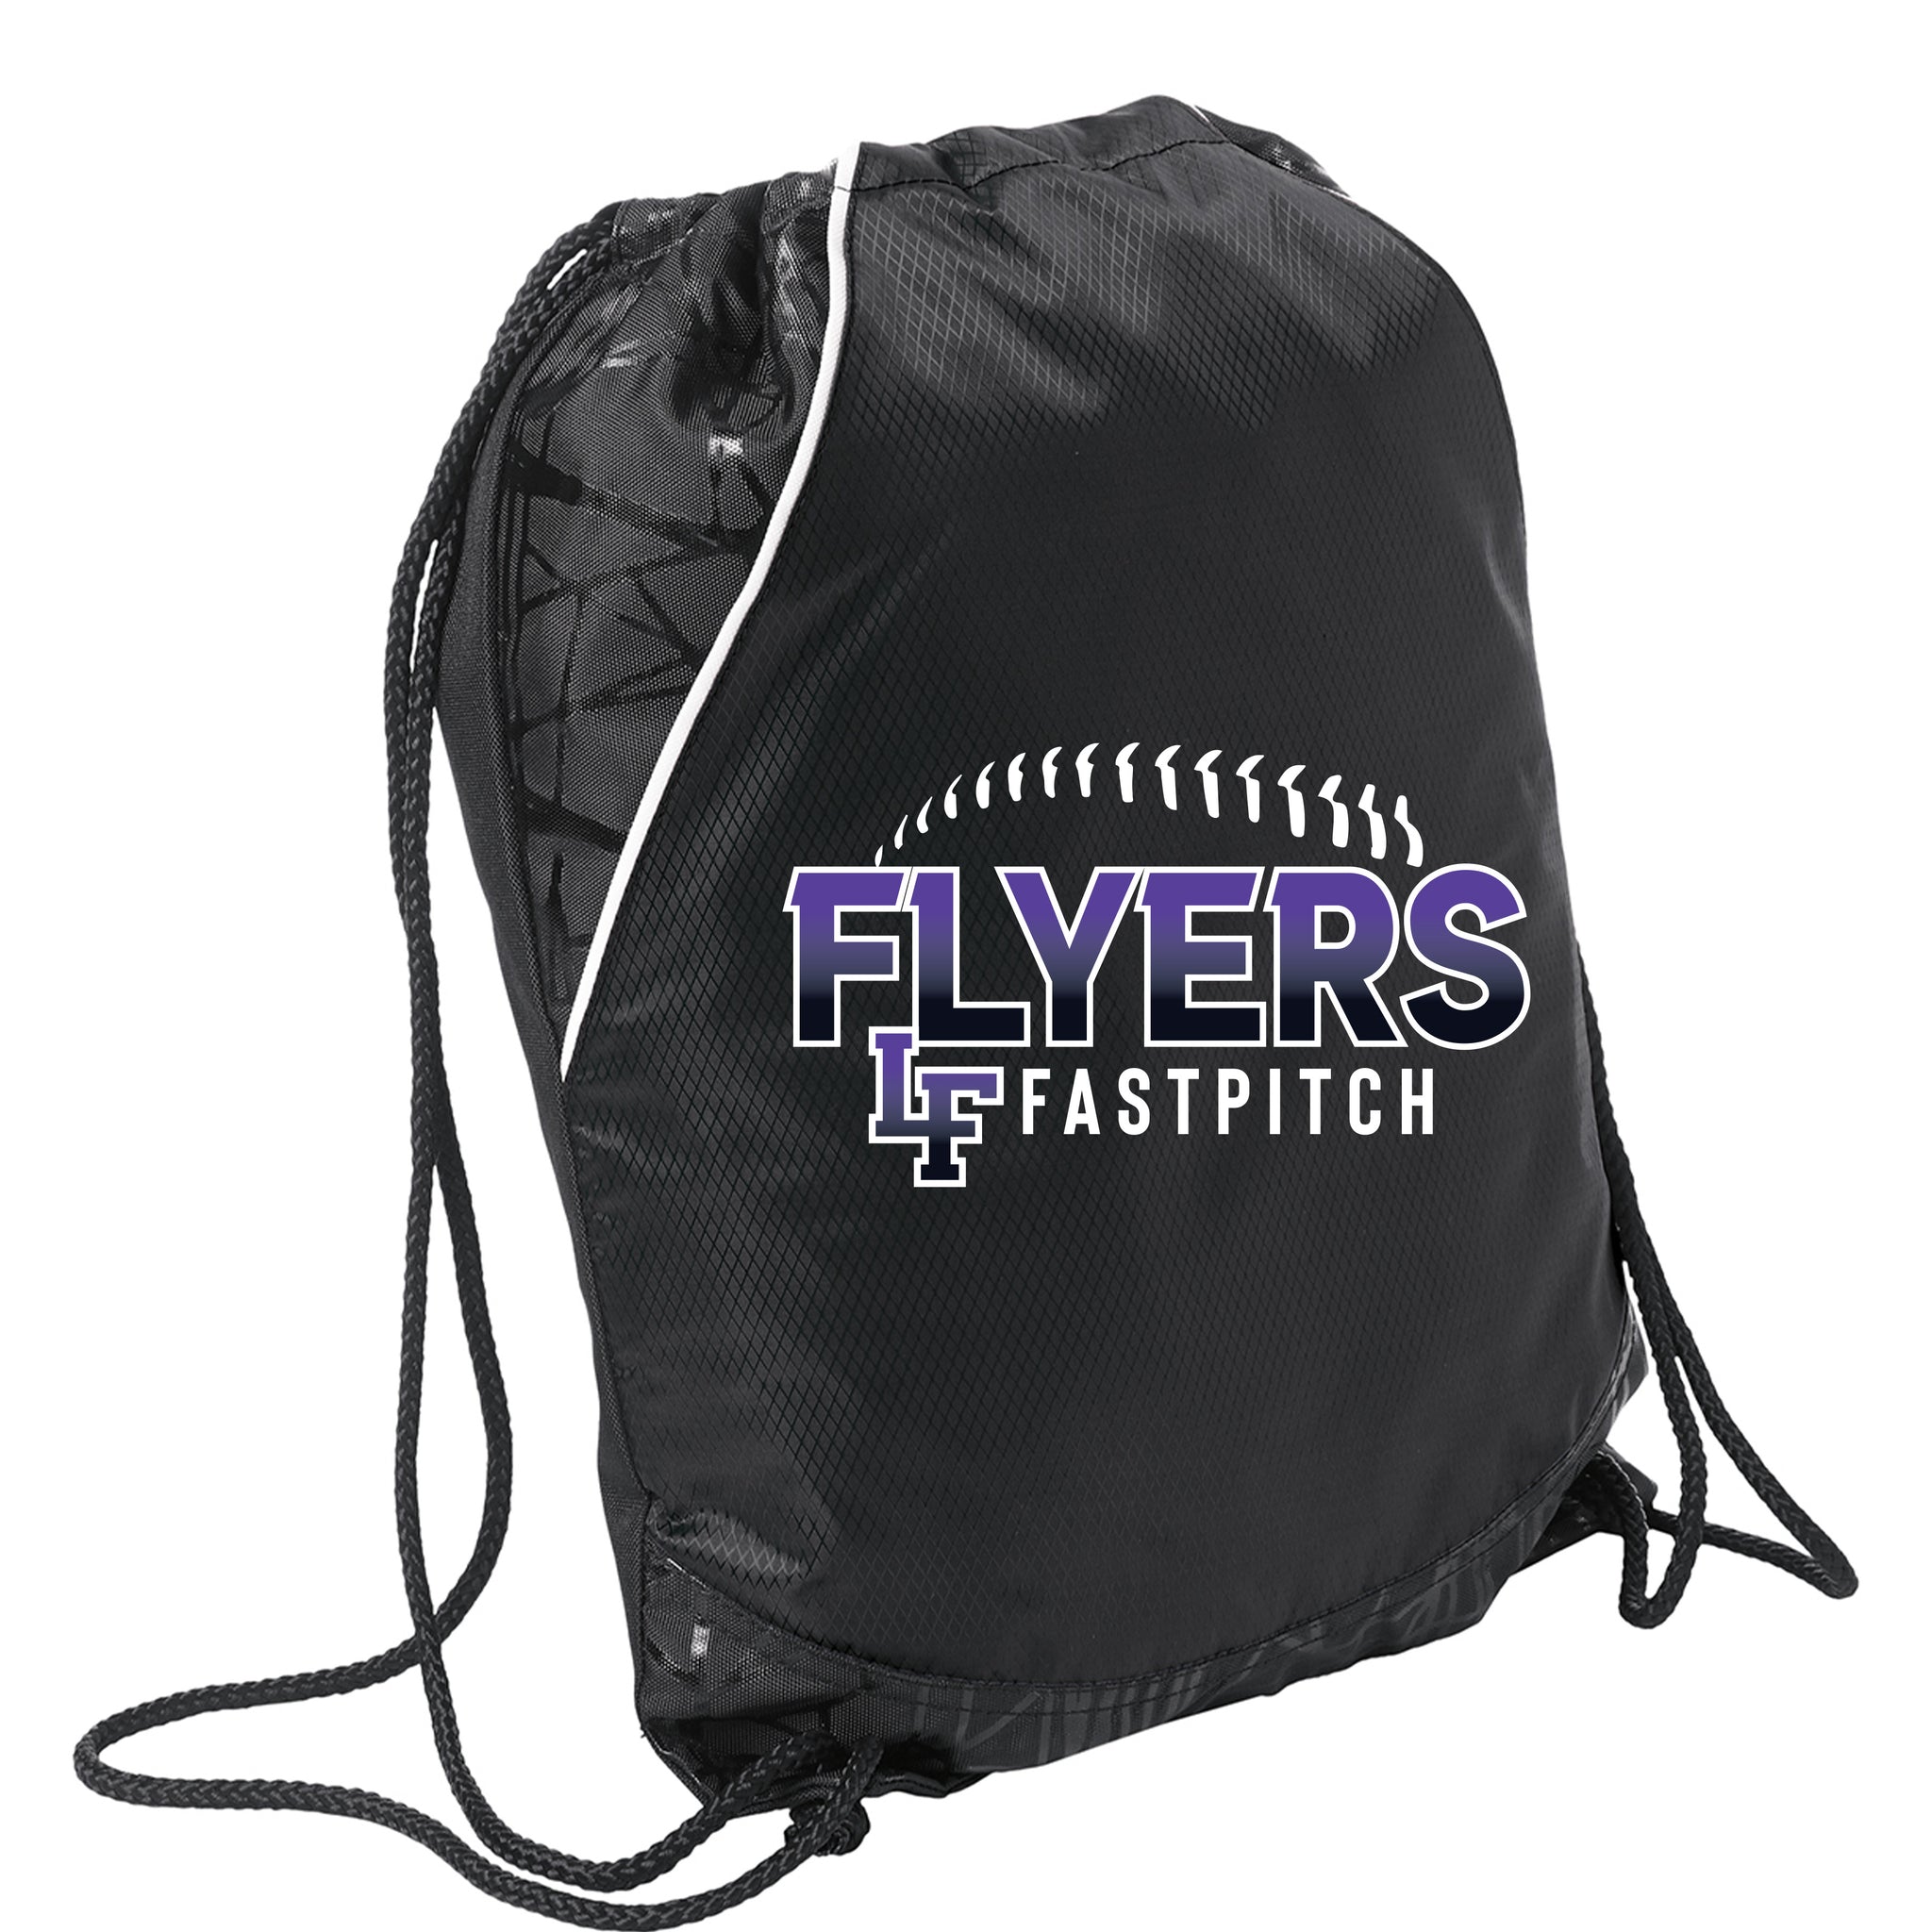 Flyers Fastpitch Cinch Pack Bag